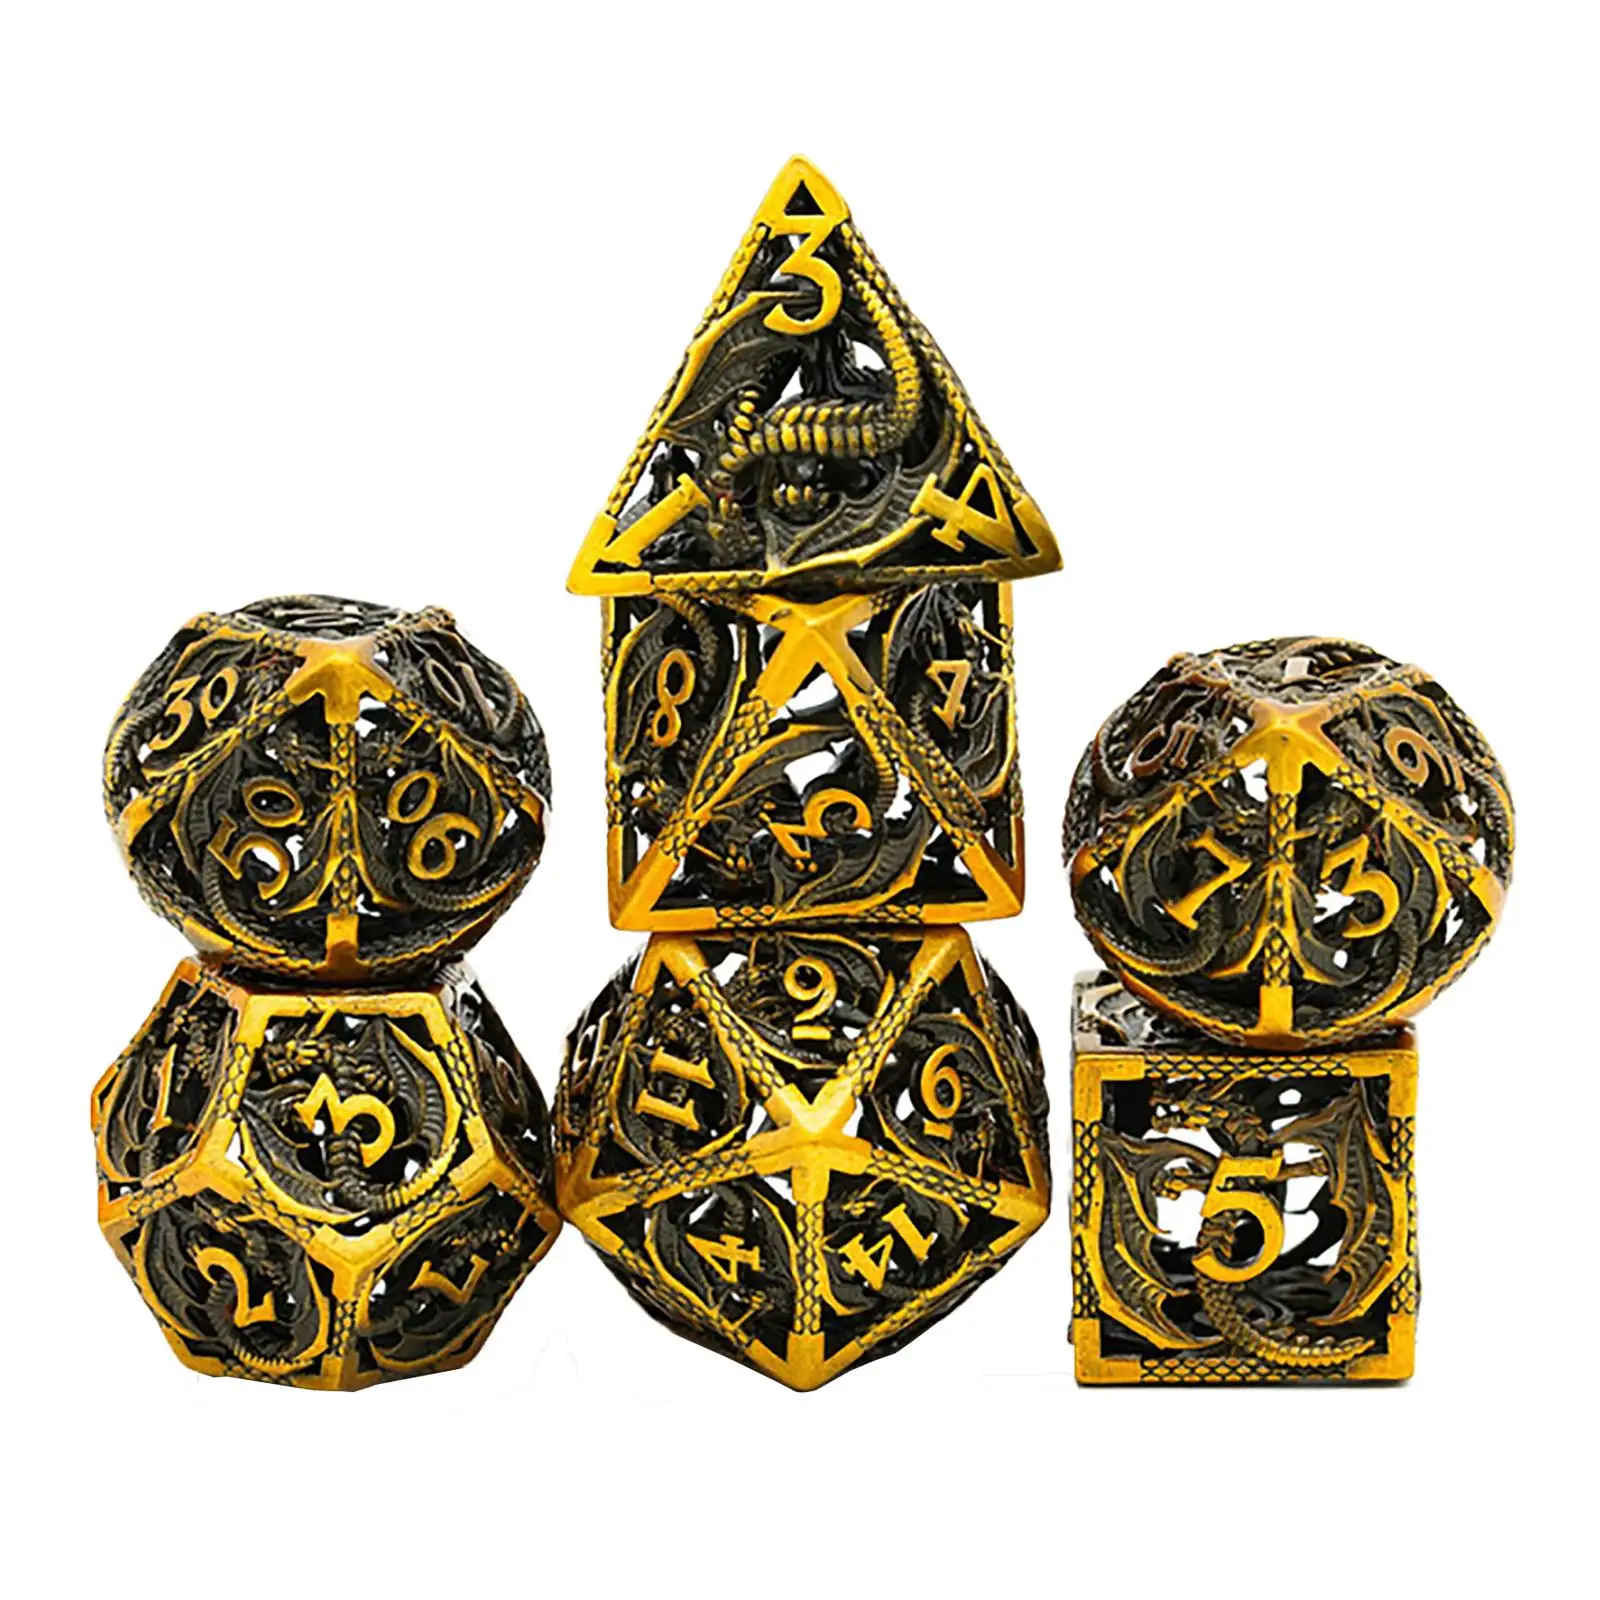 Hollow Metal Dice Set DND Polyhedral D&D Dragon Dice for Role Playing Games dice RPG Dragon Pattern-ancient